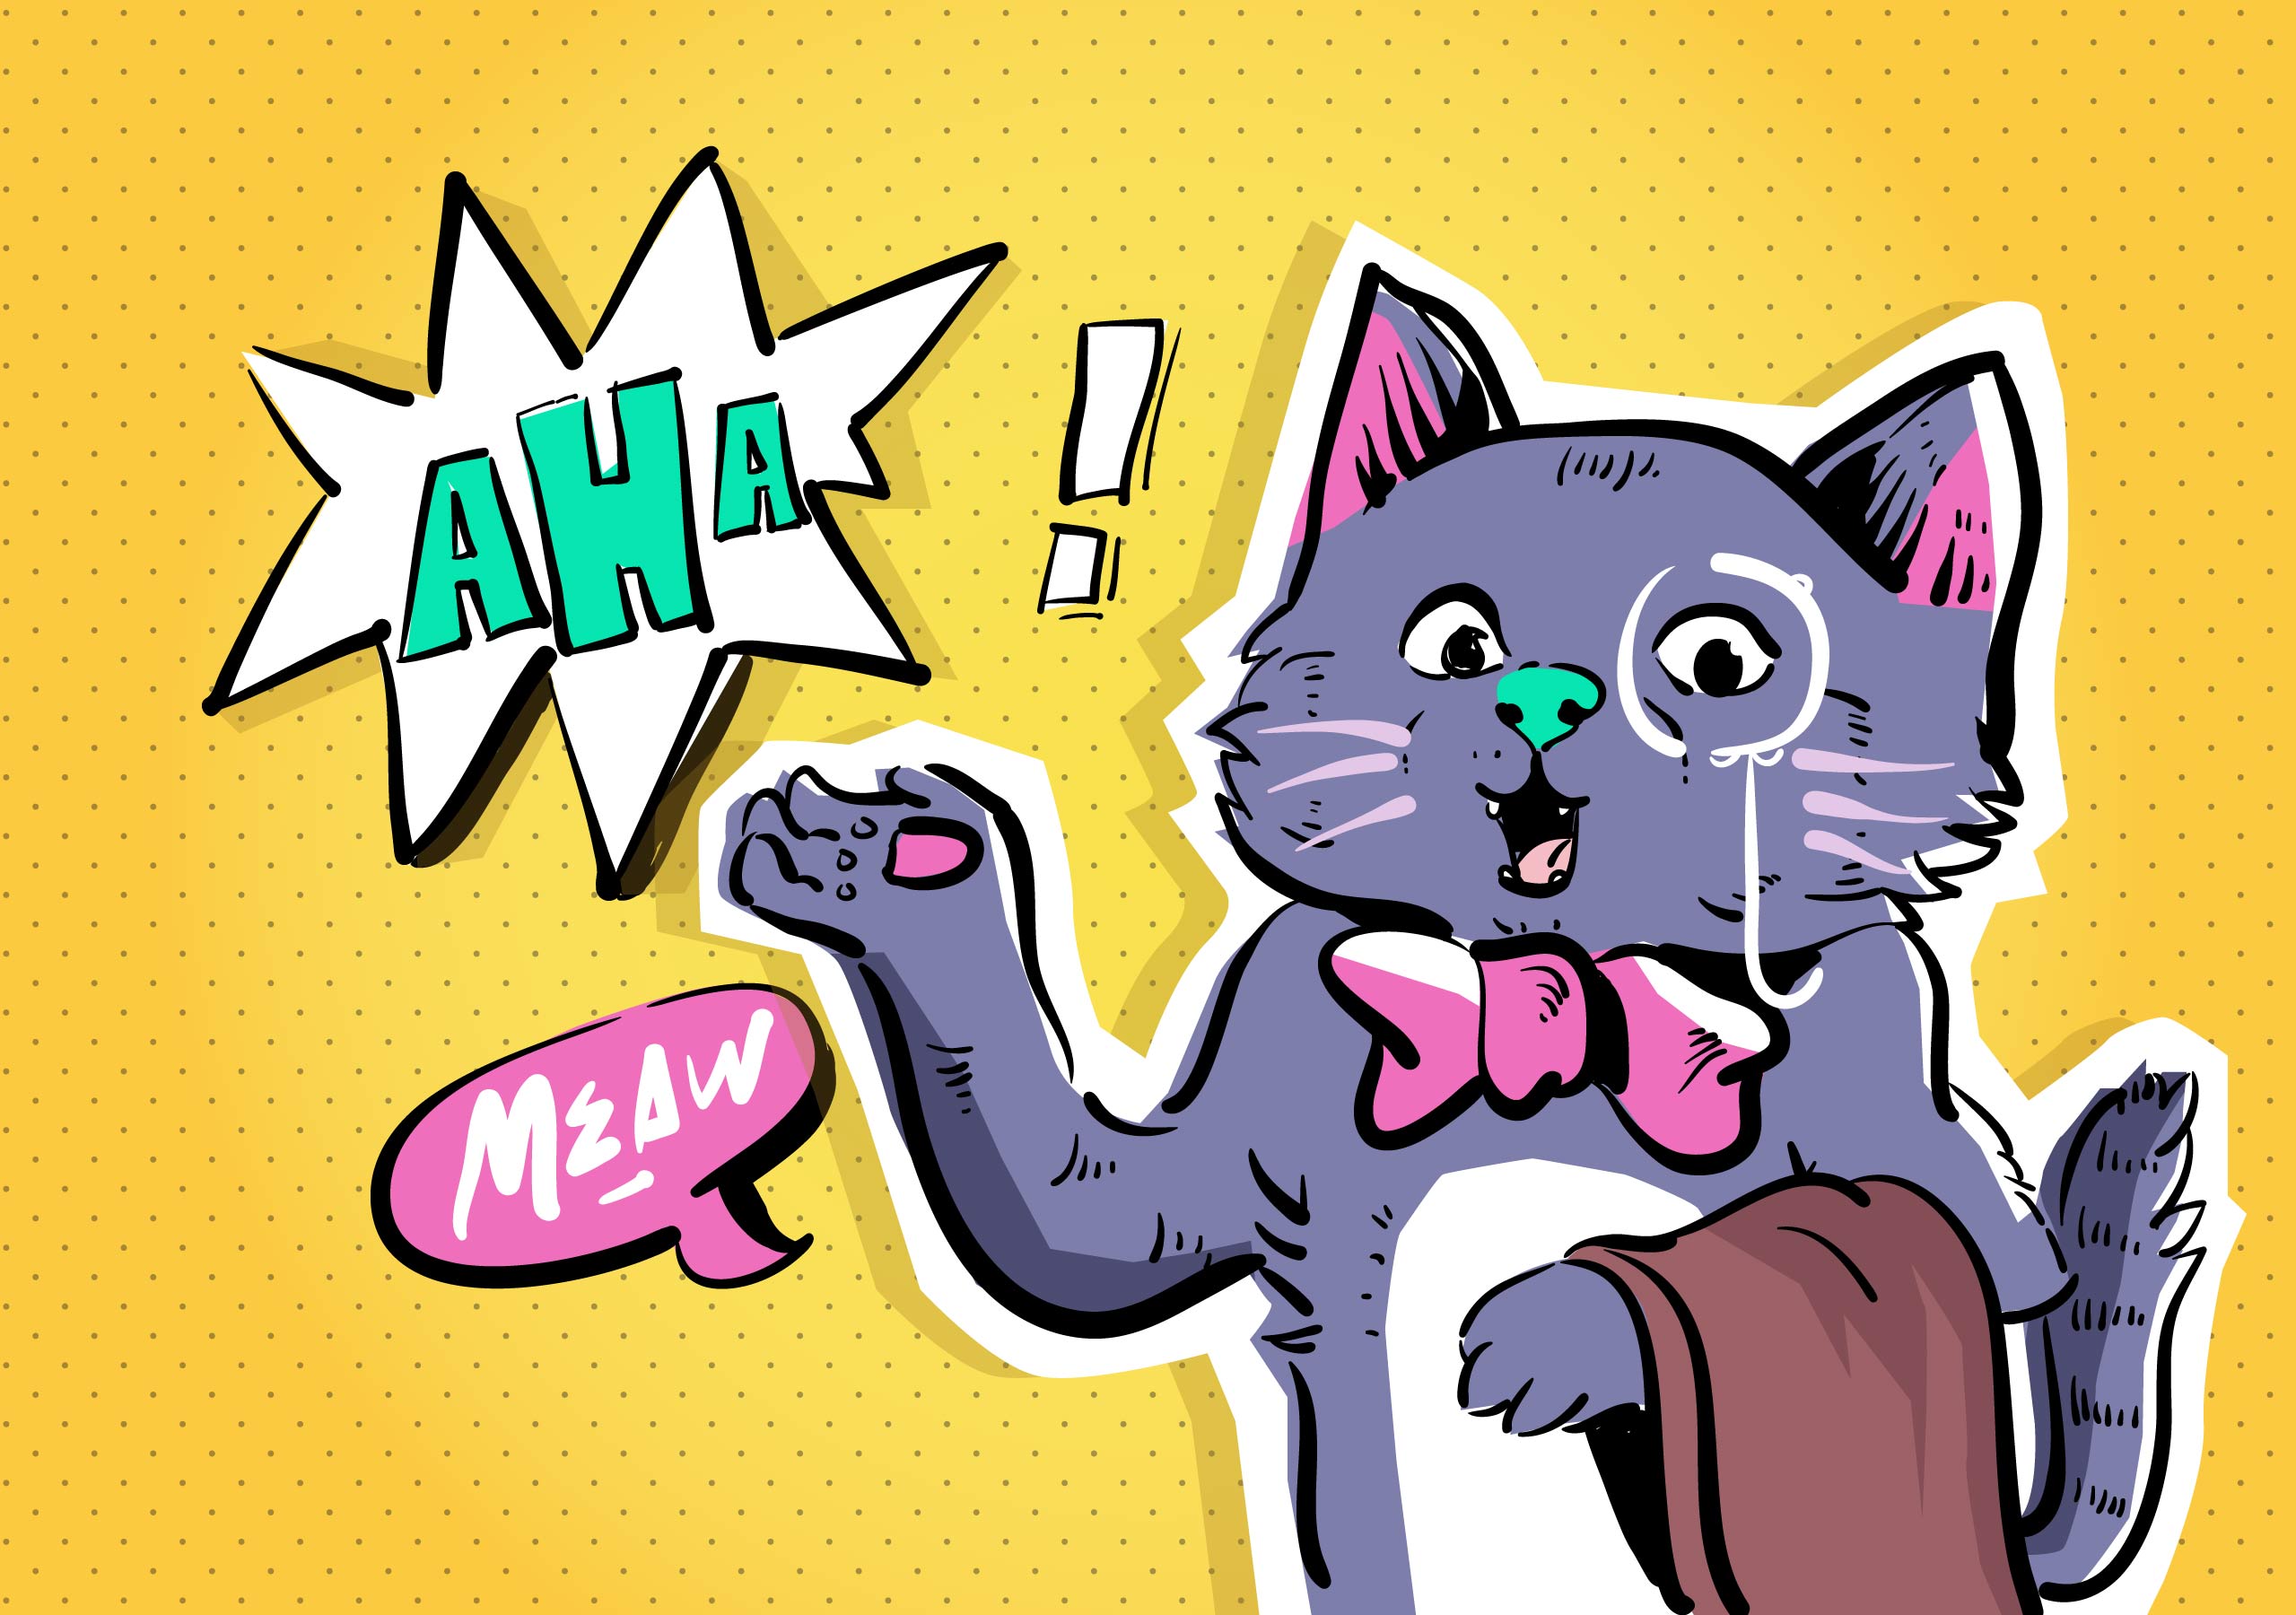 Colorful pop art style illustration of a surprised cat with 'AHA!' and 'Meow' speech bubbles, perfect for HD desktop wallpaper and background.